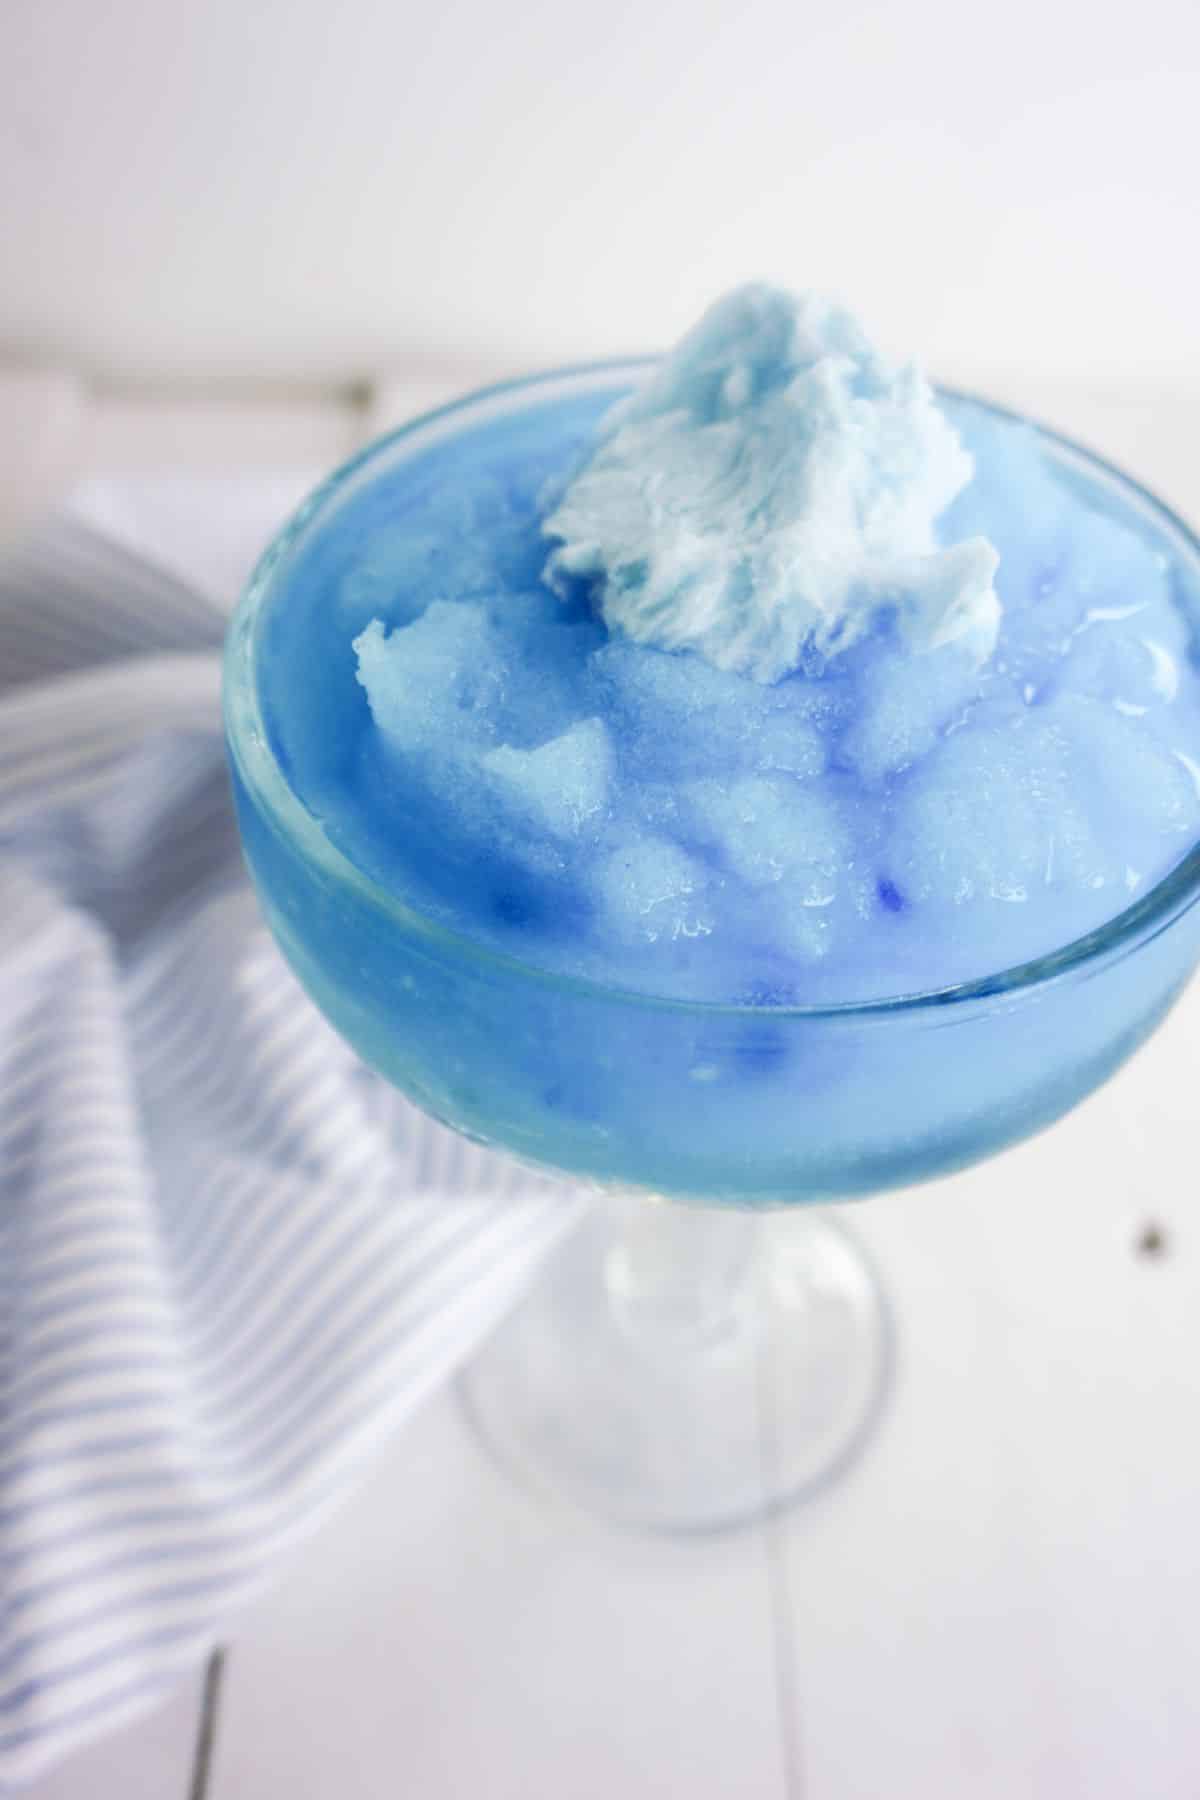 Cotton Candy Margarita in a serving glass, garnished with cotton candy on top.